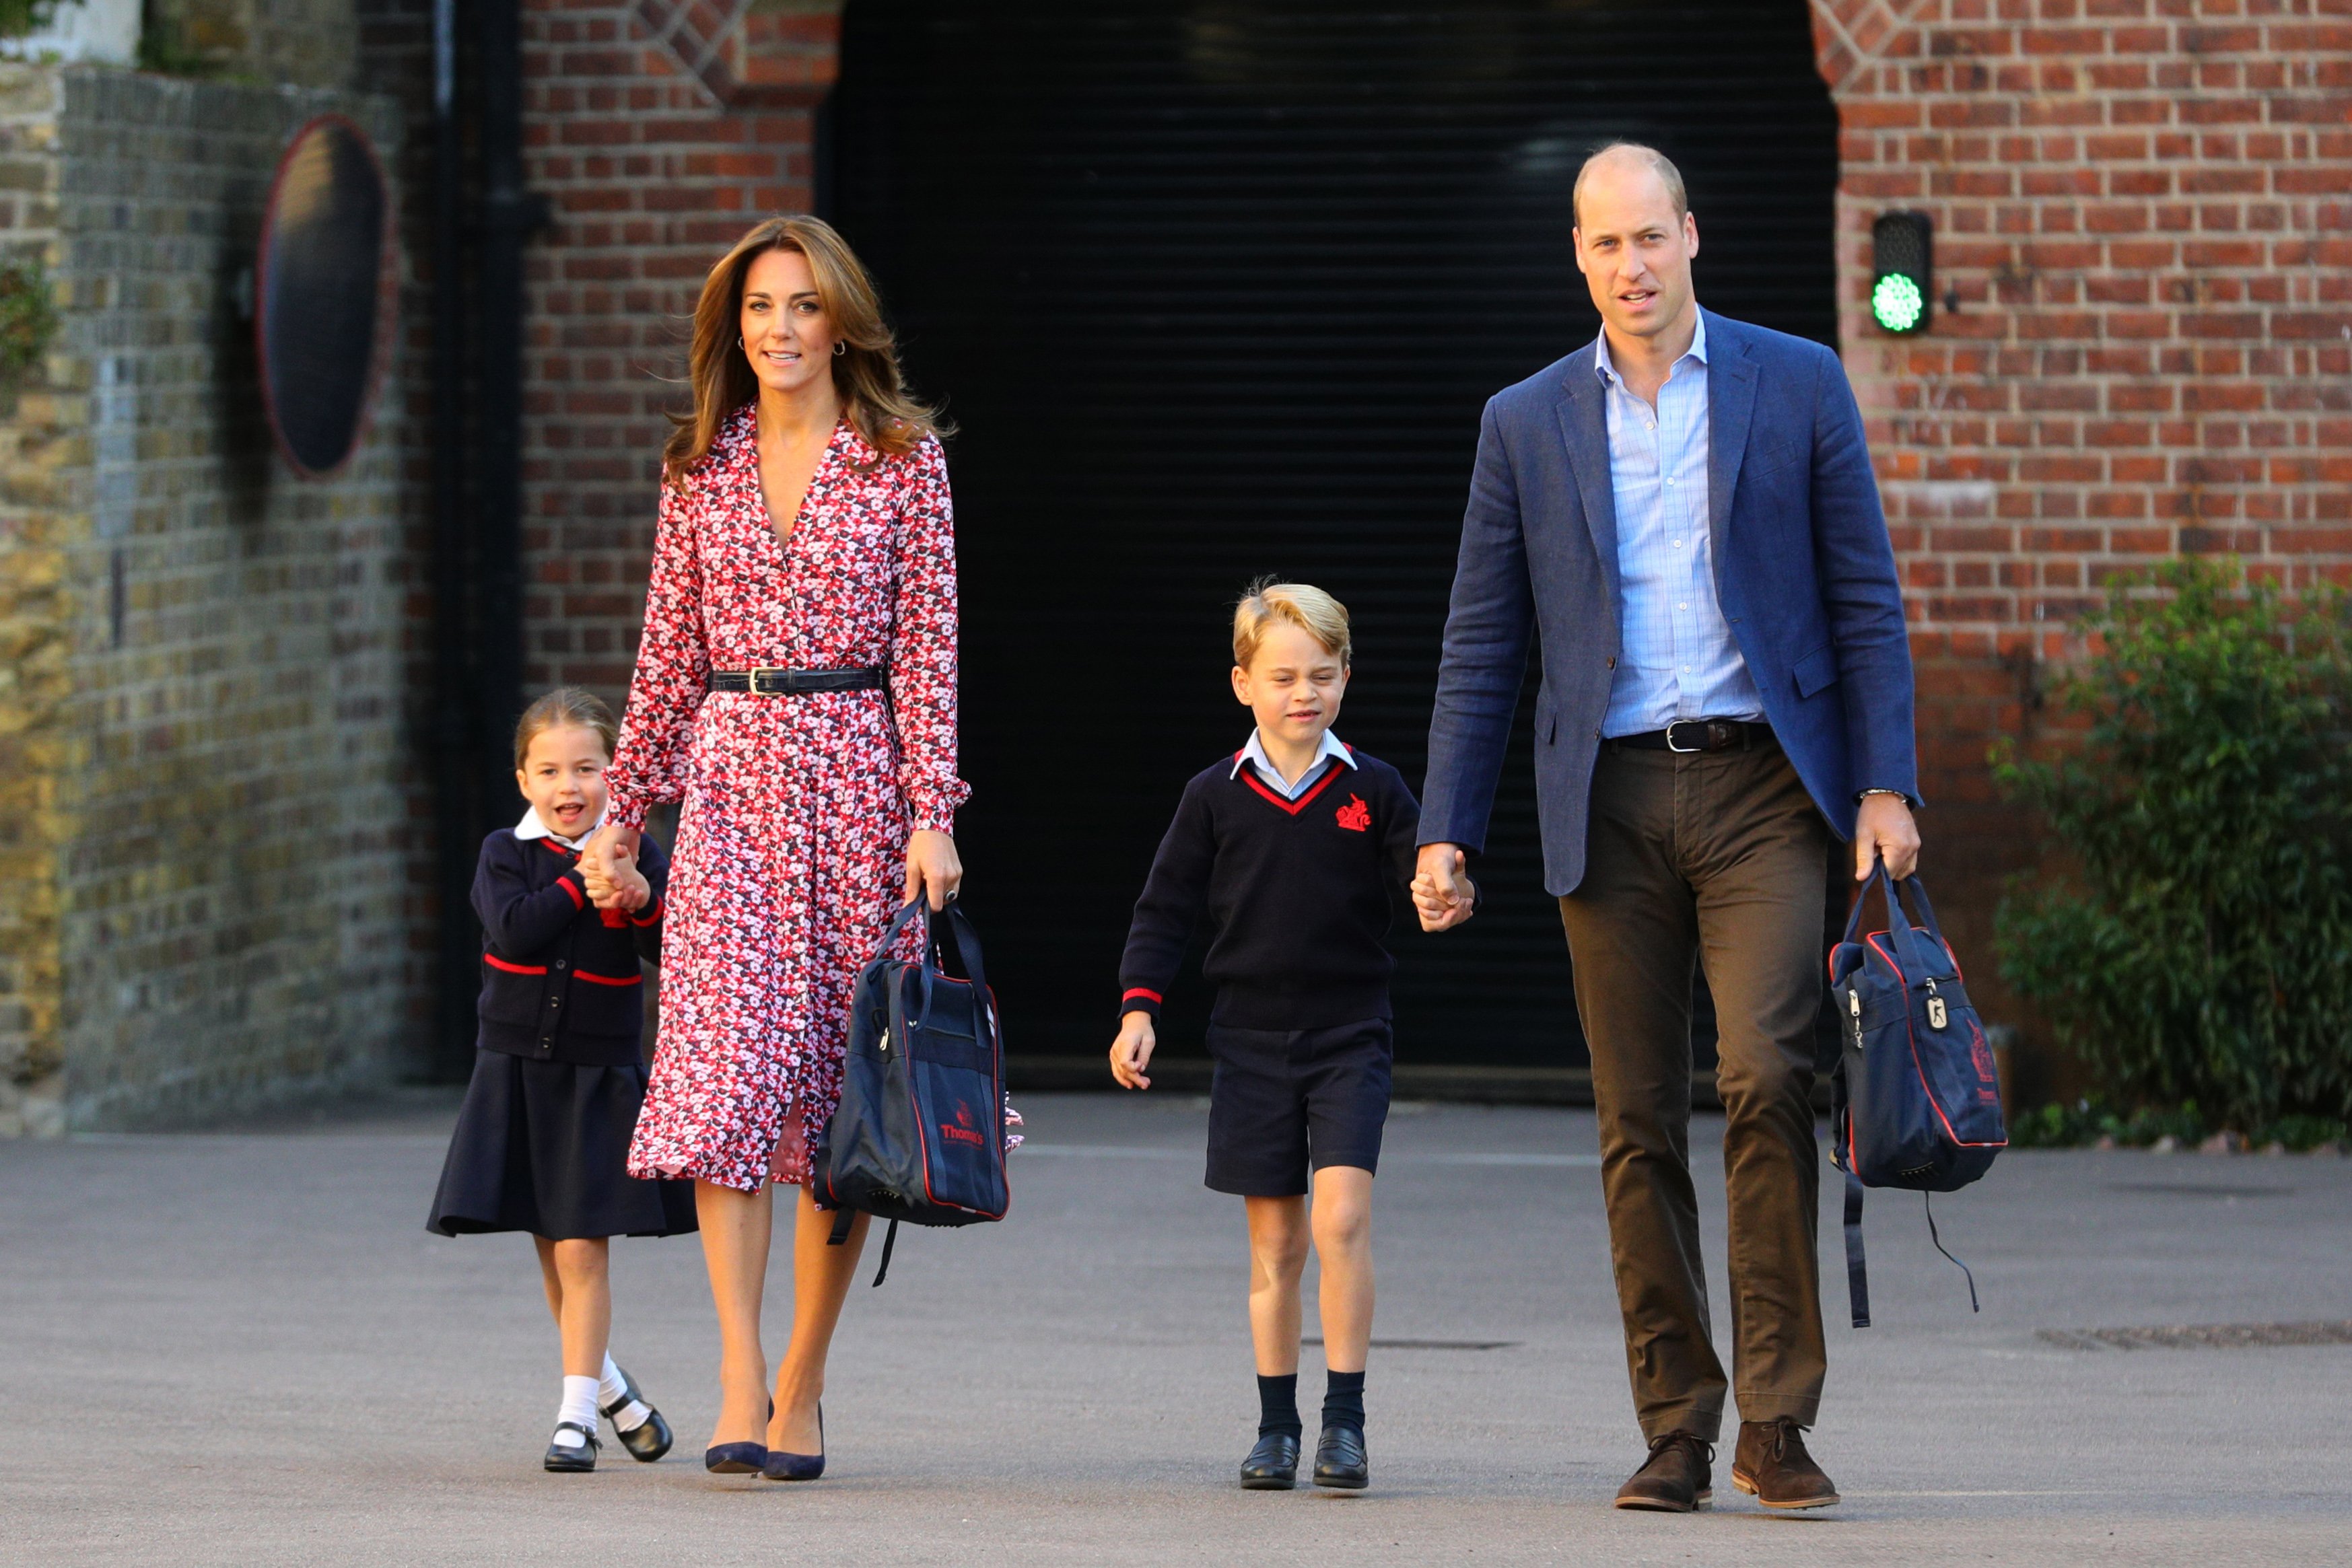 Princess Charlotte and Prince George accompanied by Kate Middleton and Prince William, who once erupted at a photographer trying to take pictures of his children